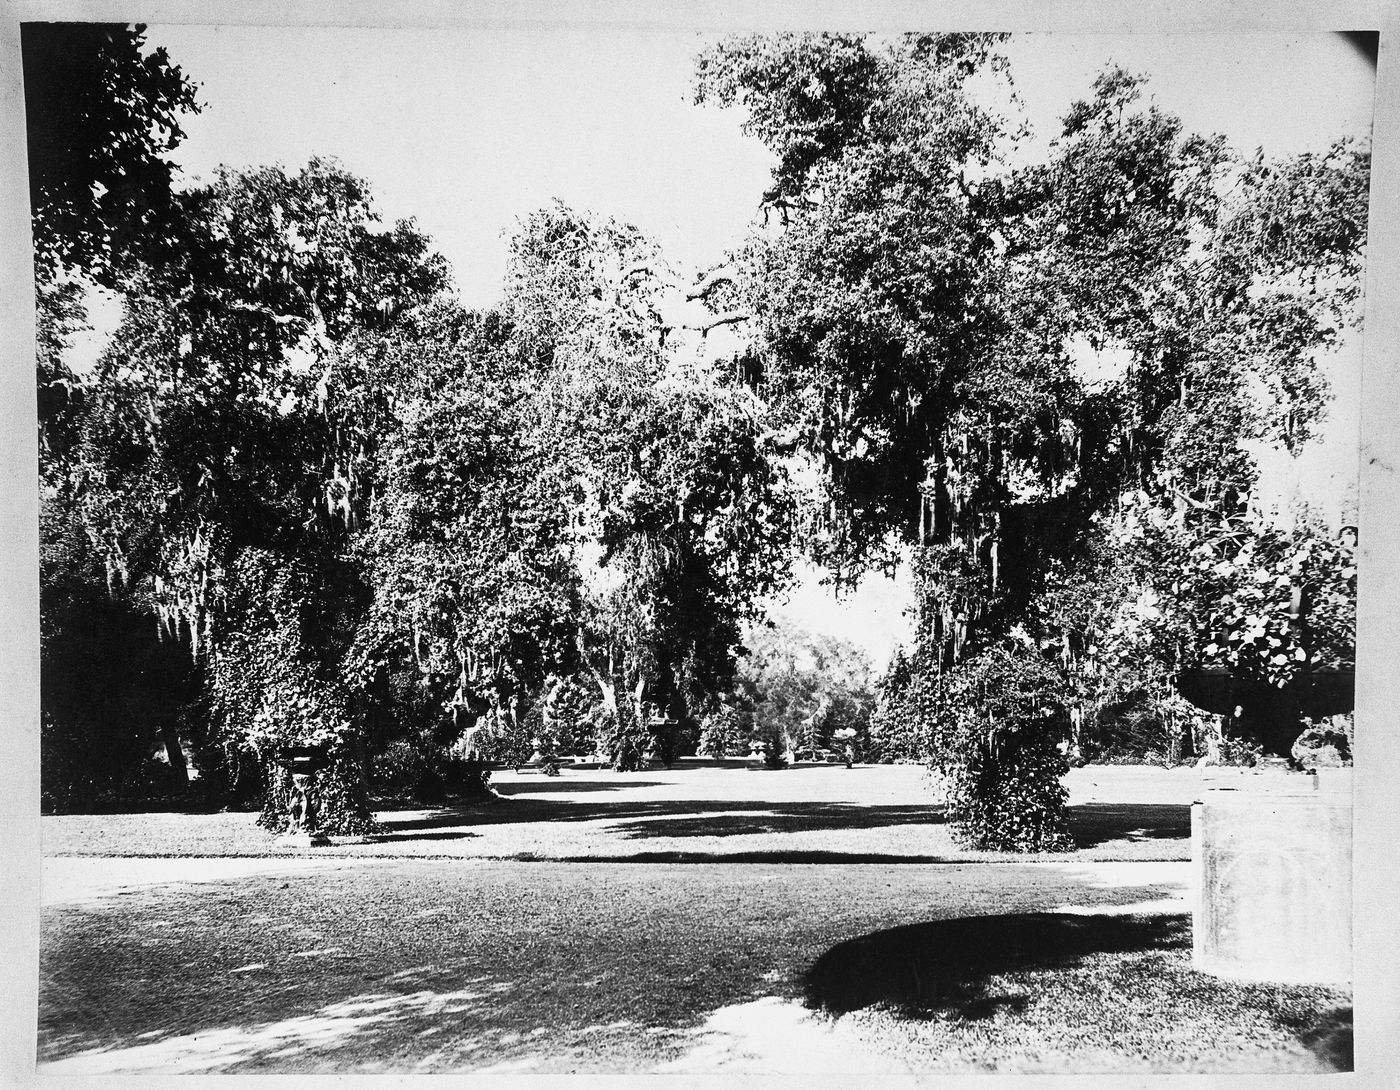 Lawn with trees, Linden Towers, James Clair Flood Estate, Atherton, California